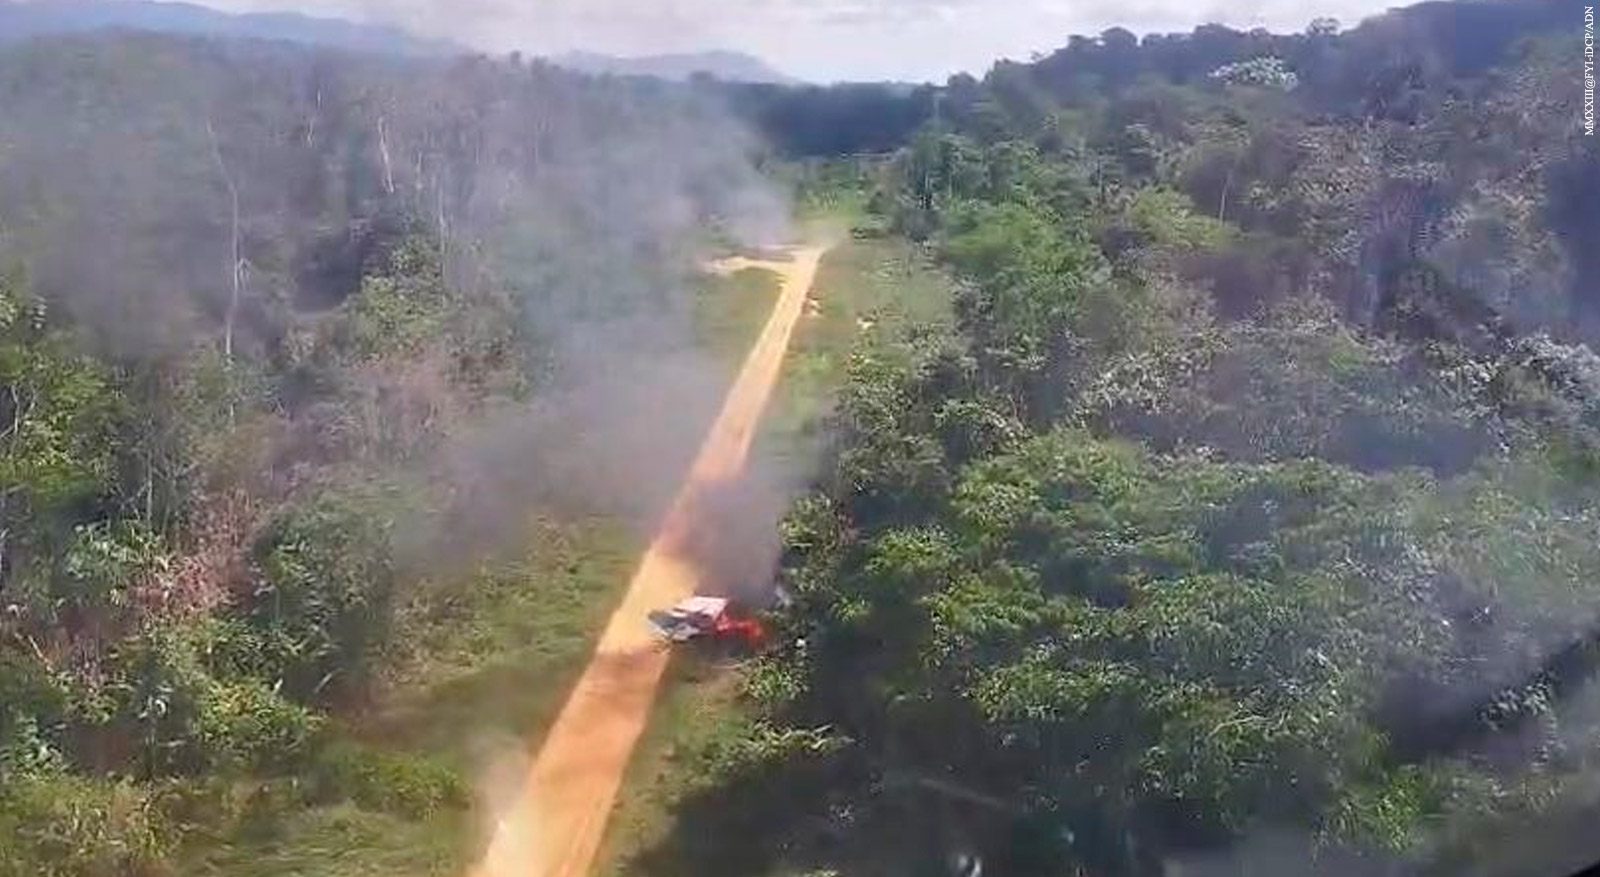 FAB intensifies actions in the Amazon region with Operation Catrimani